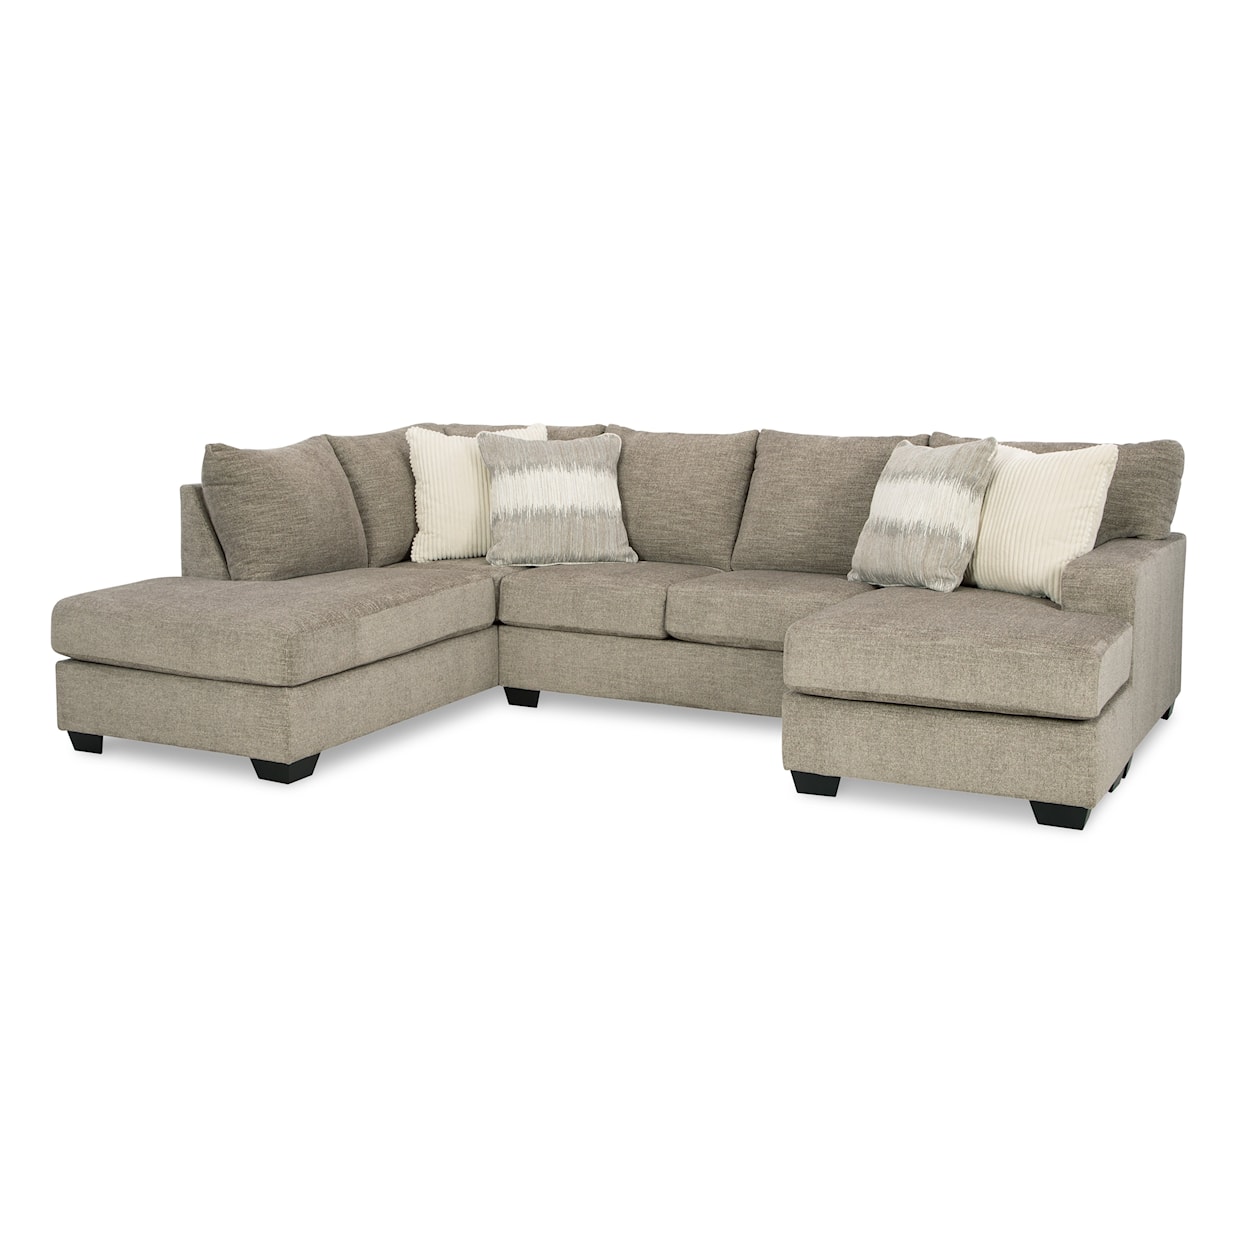 Signature Design by Ashley Creswell 2-Piece Sectional with 2 Chaises